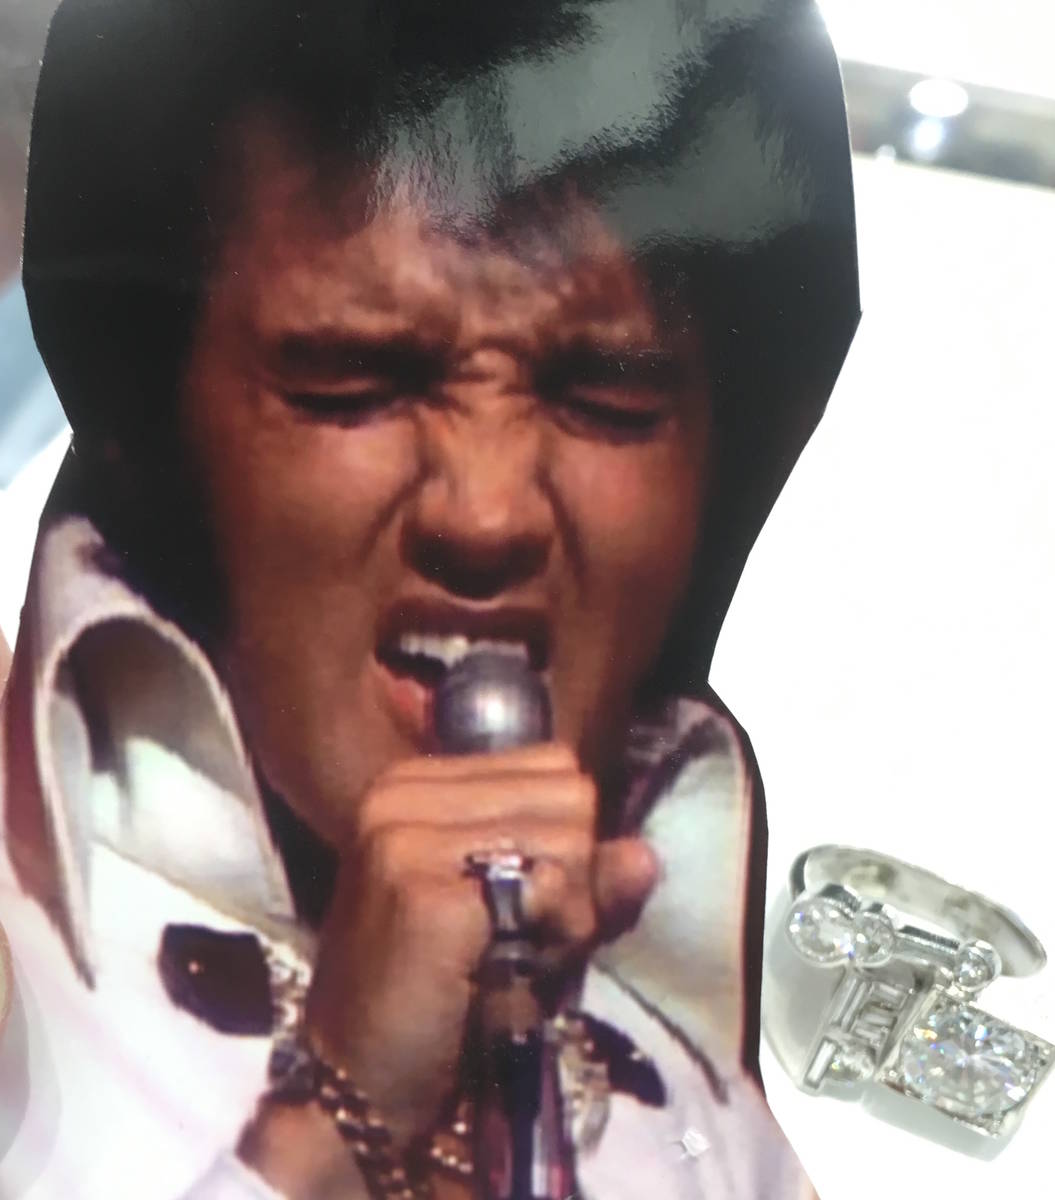 An image of Elvis Presley performing with his stage ring at Las Vegas Hilton in the 1970s. The ...